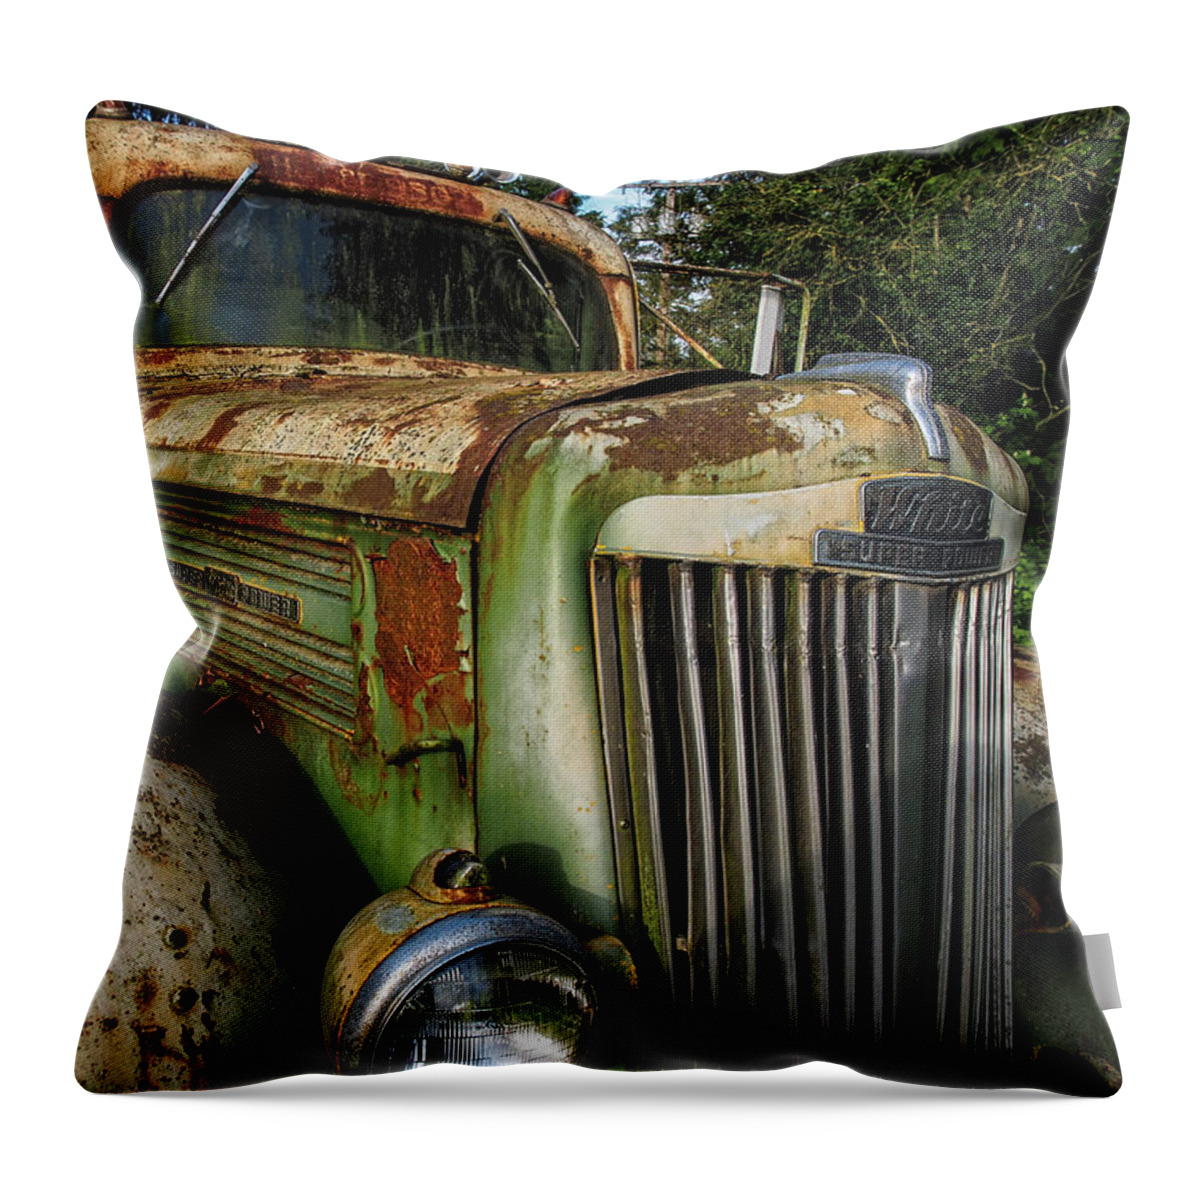 White Truck Throw Pillow featuring the photograph White Super Power Truck by Gary Karlsen